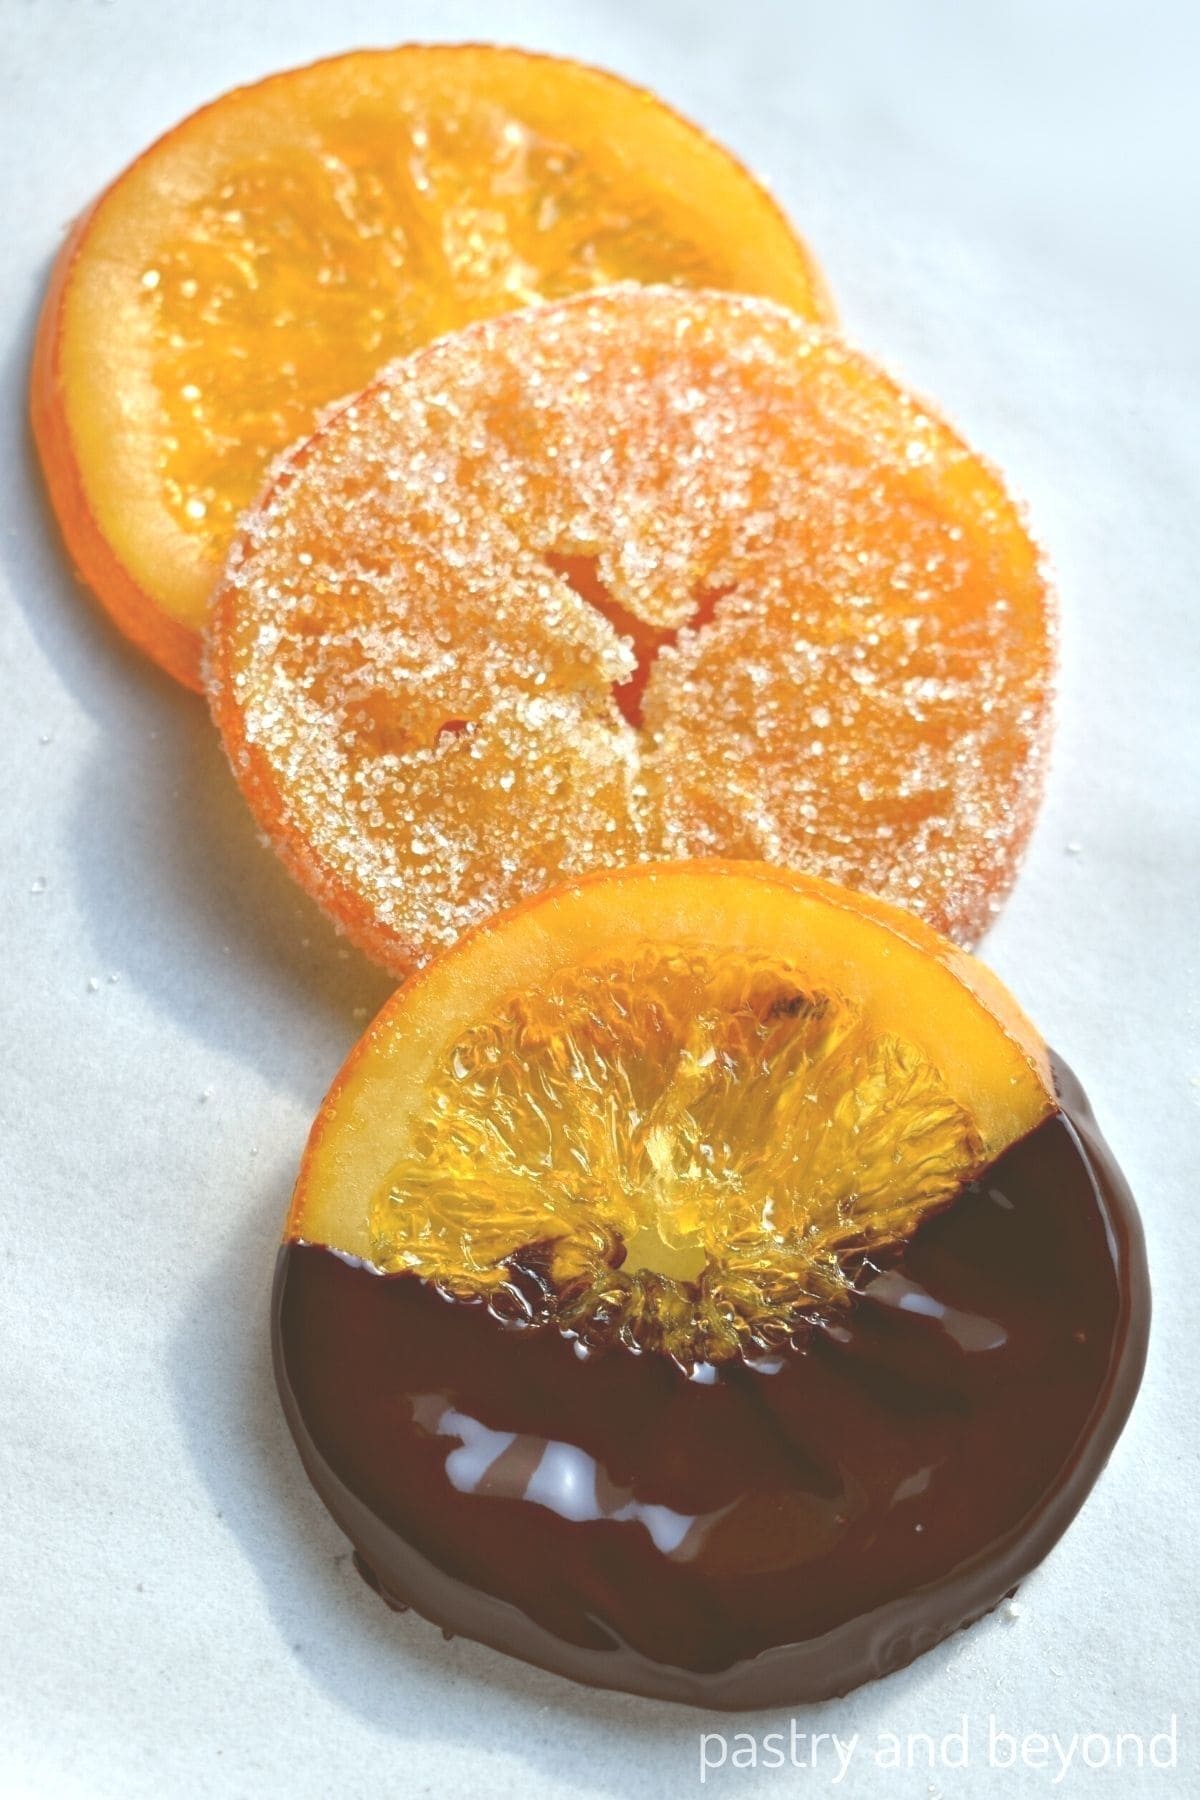 Chocolate covered candied orange, sugar covered candied orange and plain candied orange on a white surface.